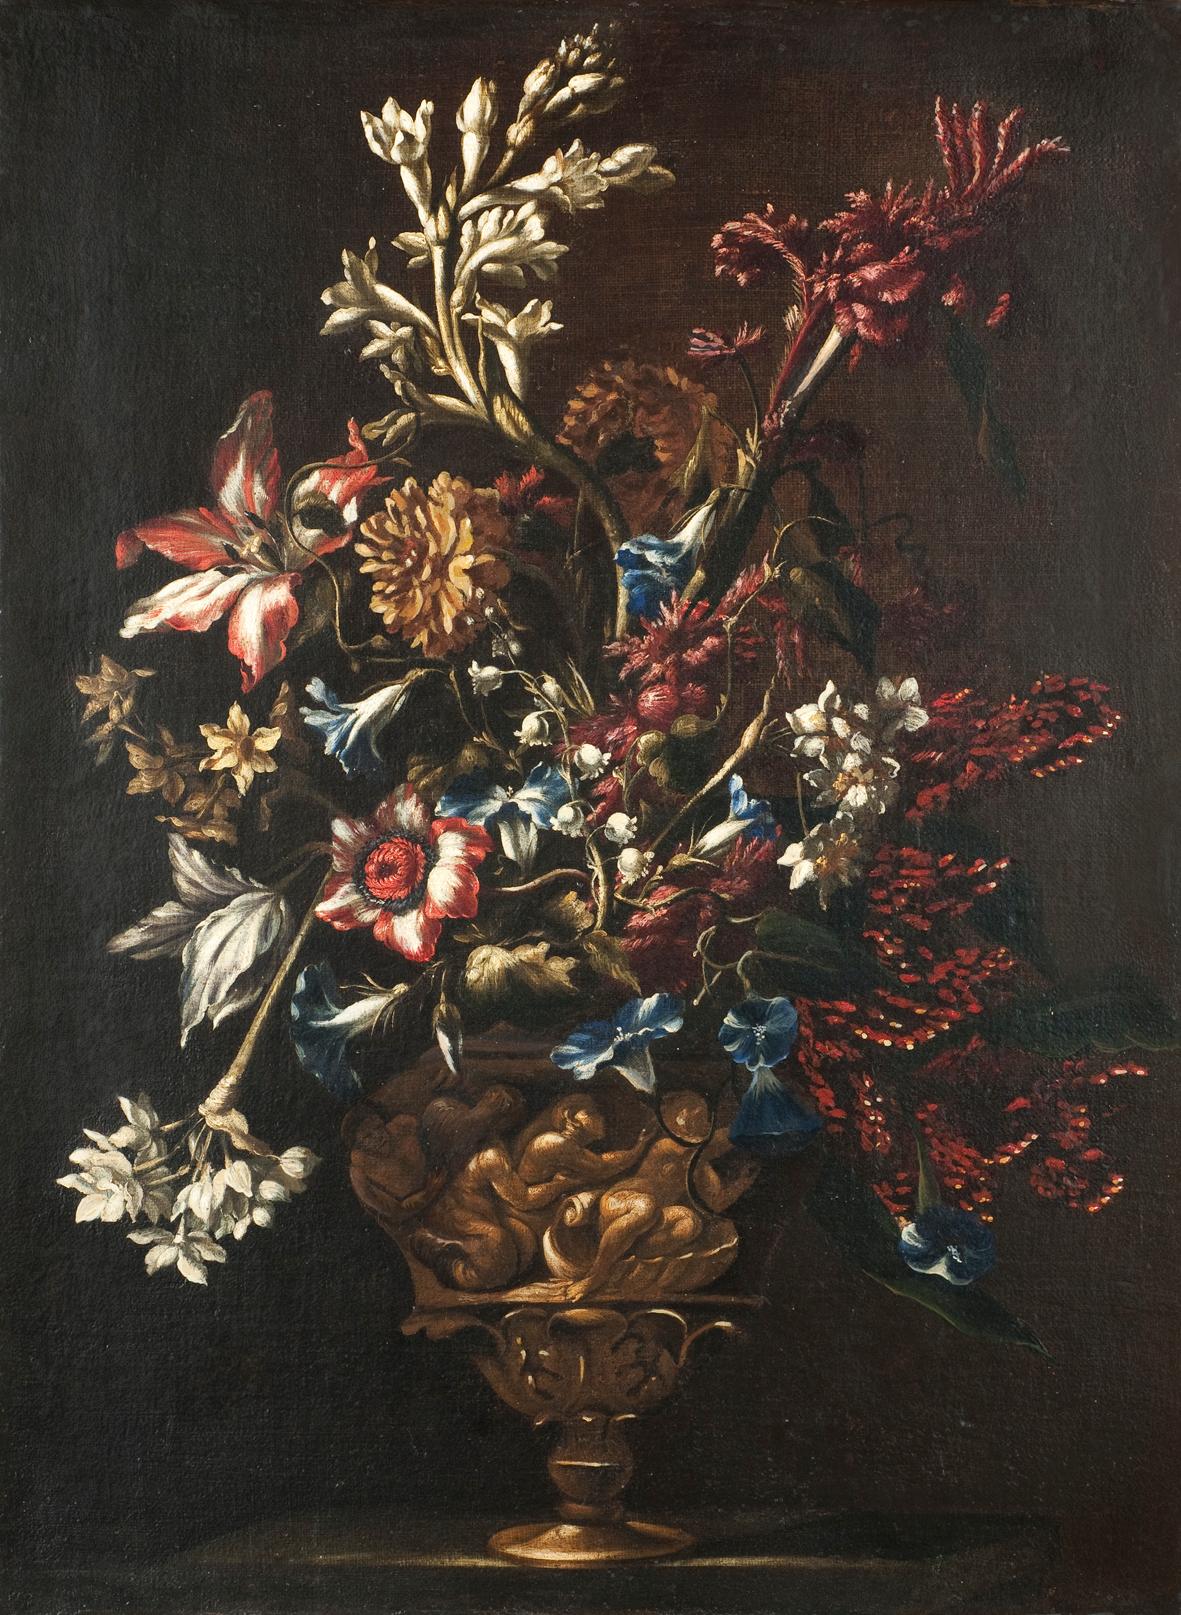 Unknown Still-Life Painting - 17th Century by Mario Nuzzi Still Life Flower Vase Oil on Canvas Blue Red Gold